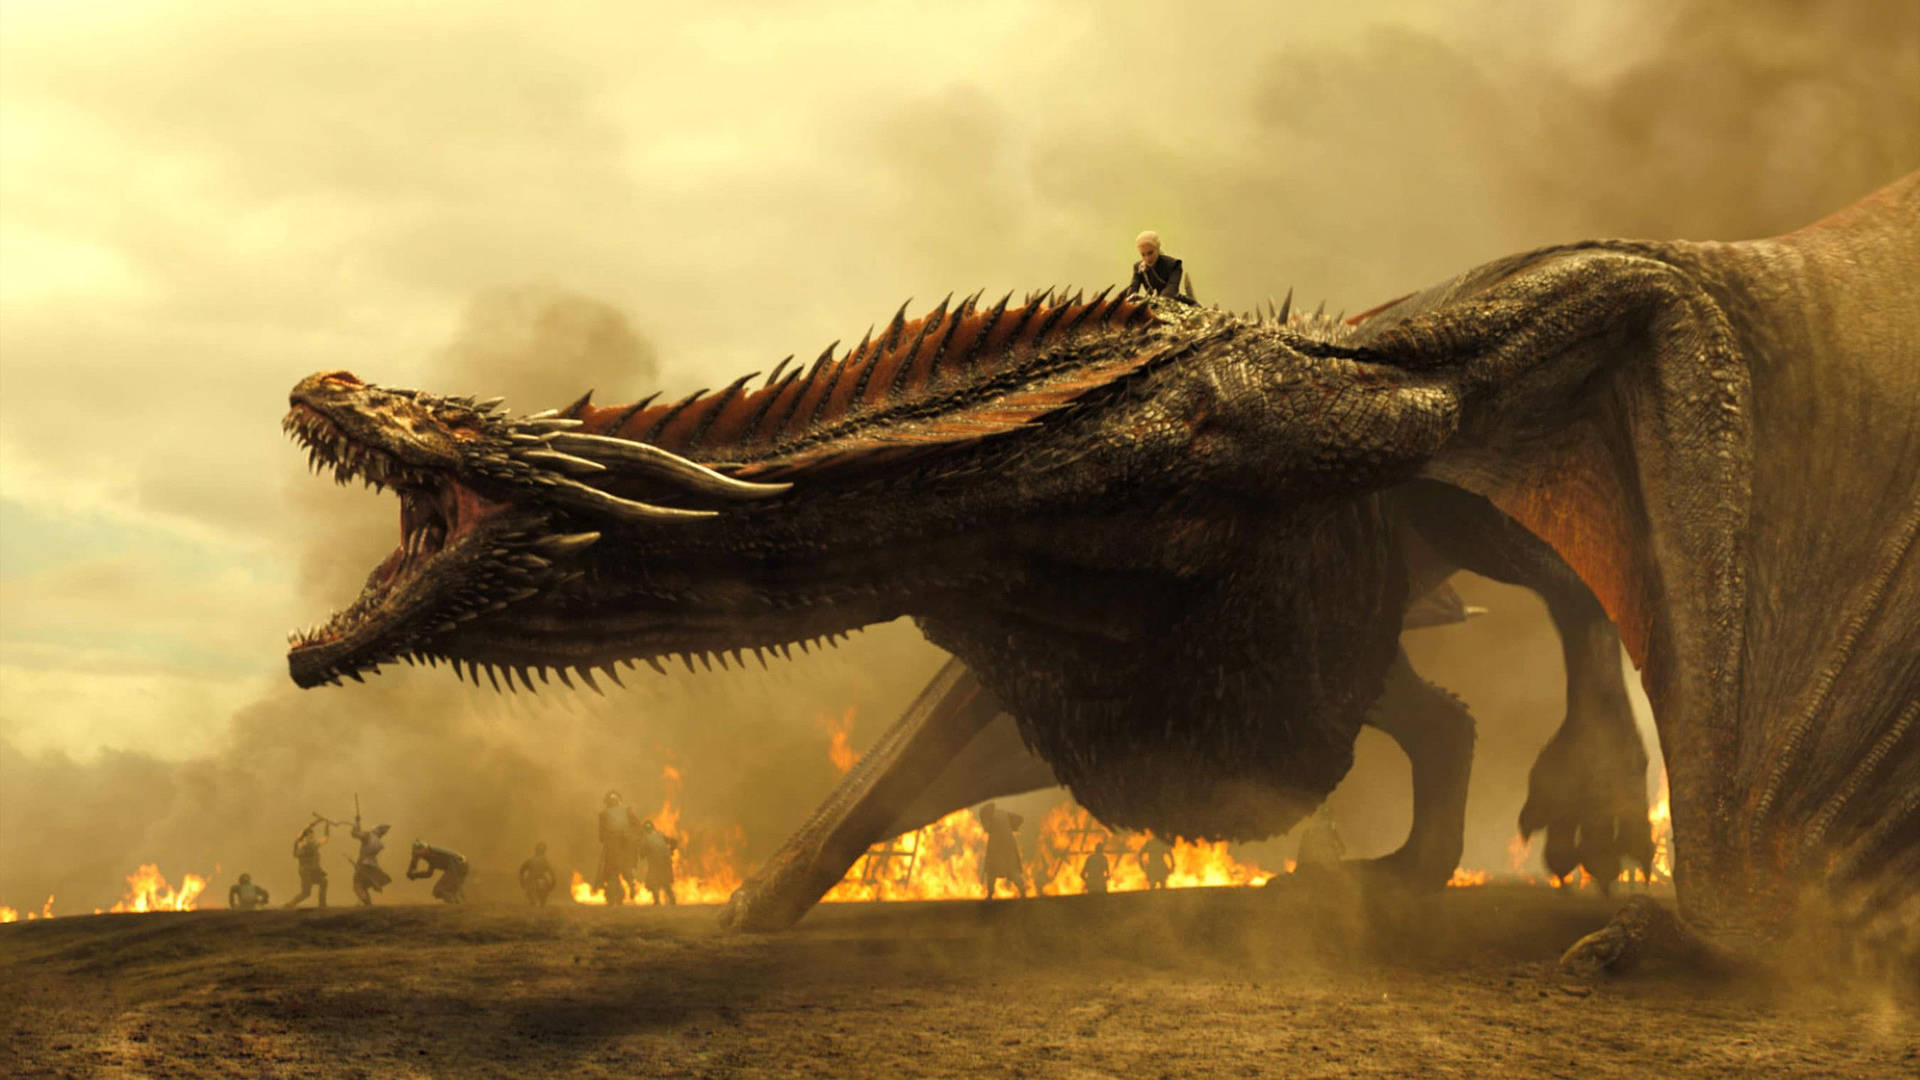 Hd Fire Dragon Of Game Of Thrones